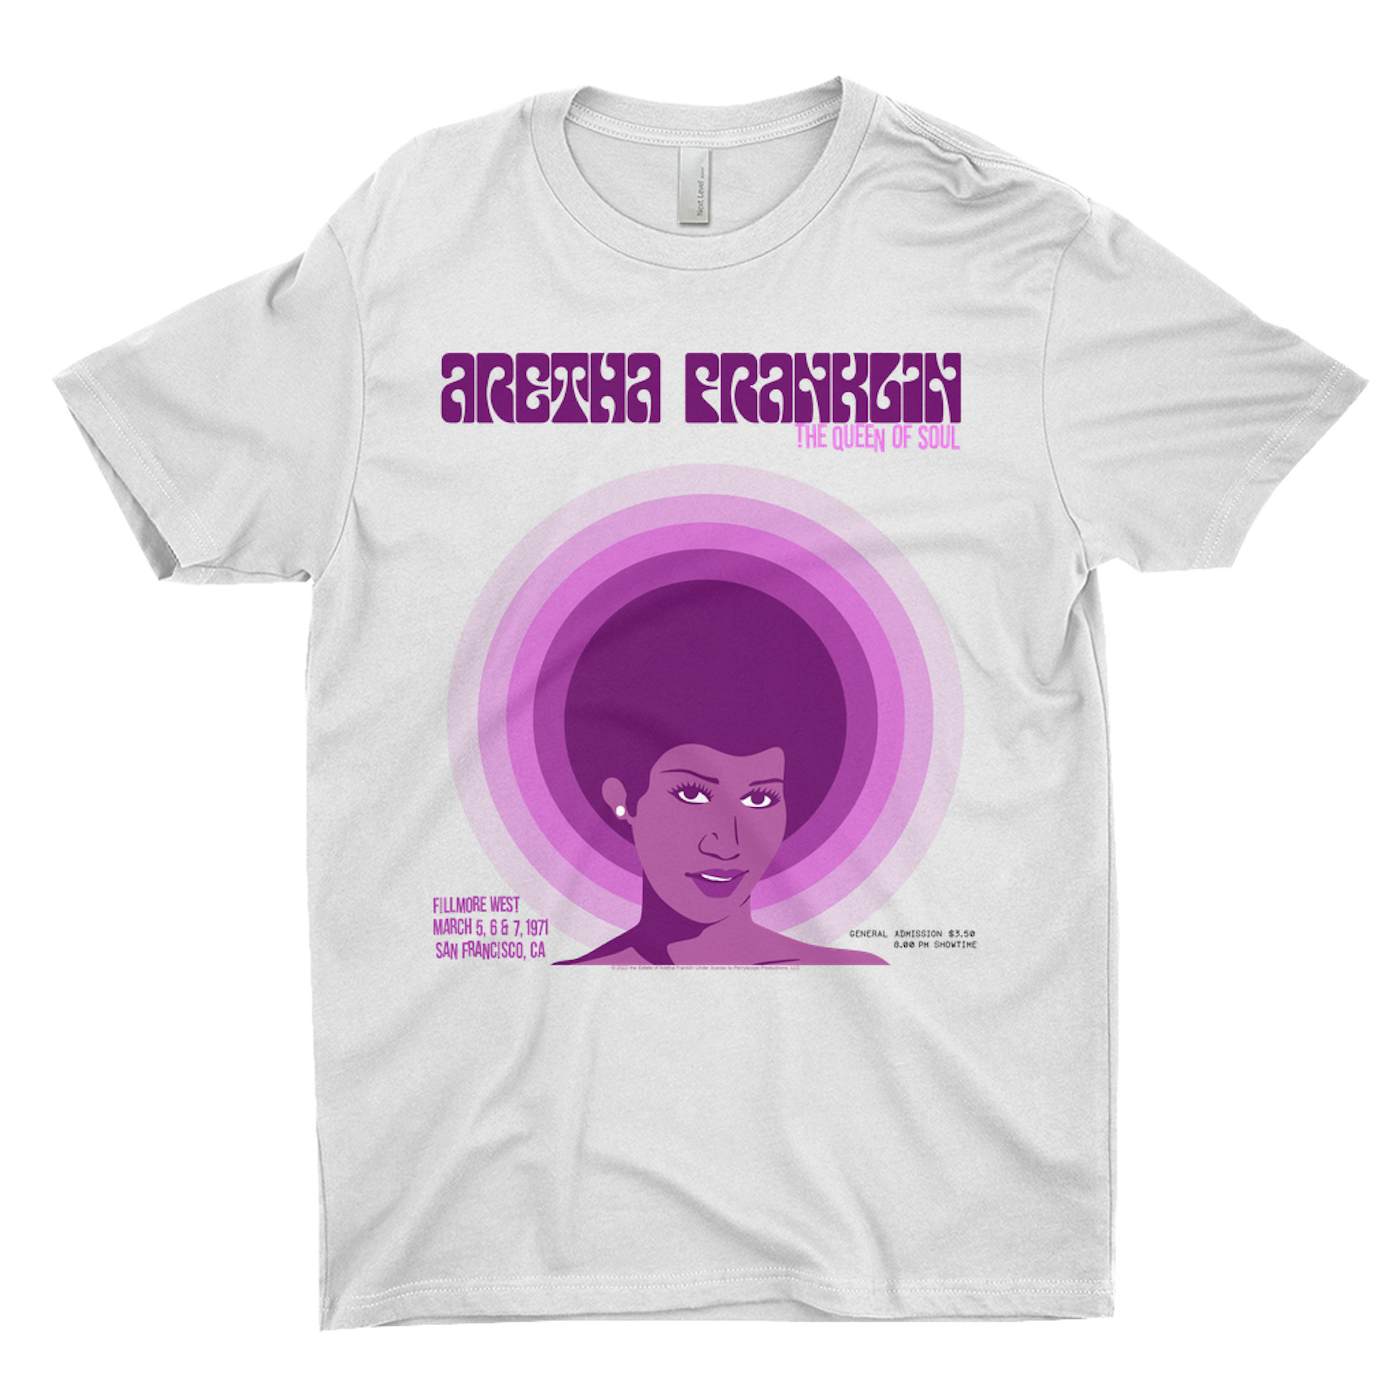 Aretha Franklin T-Shirt | The Queen Of Soul Filmore West Aretha Franklin Shirt